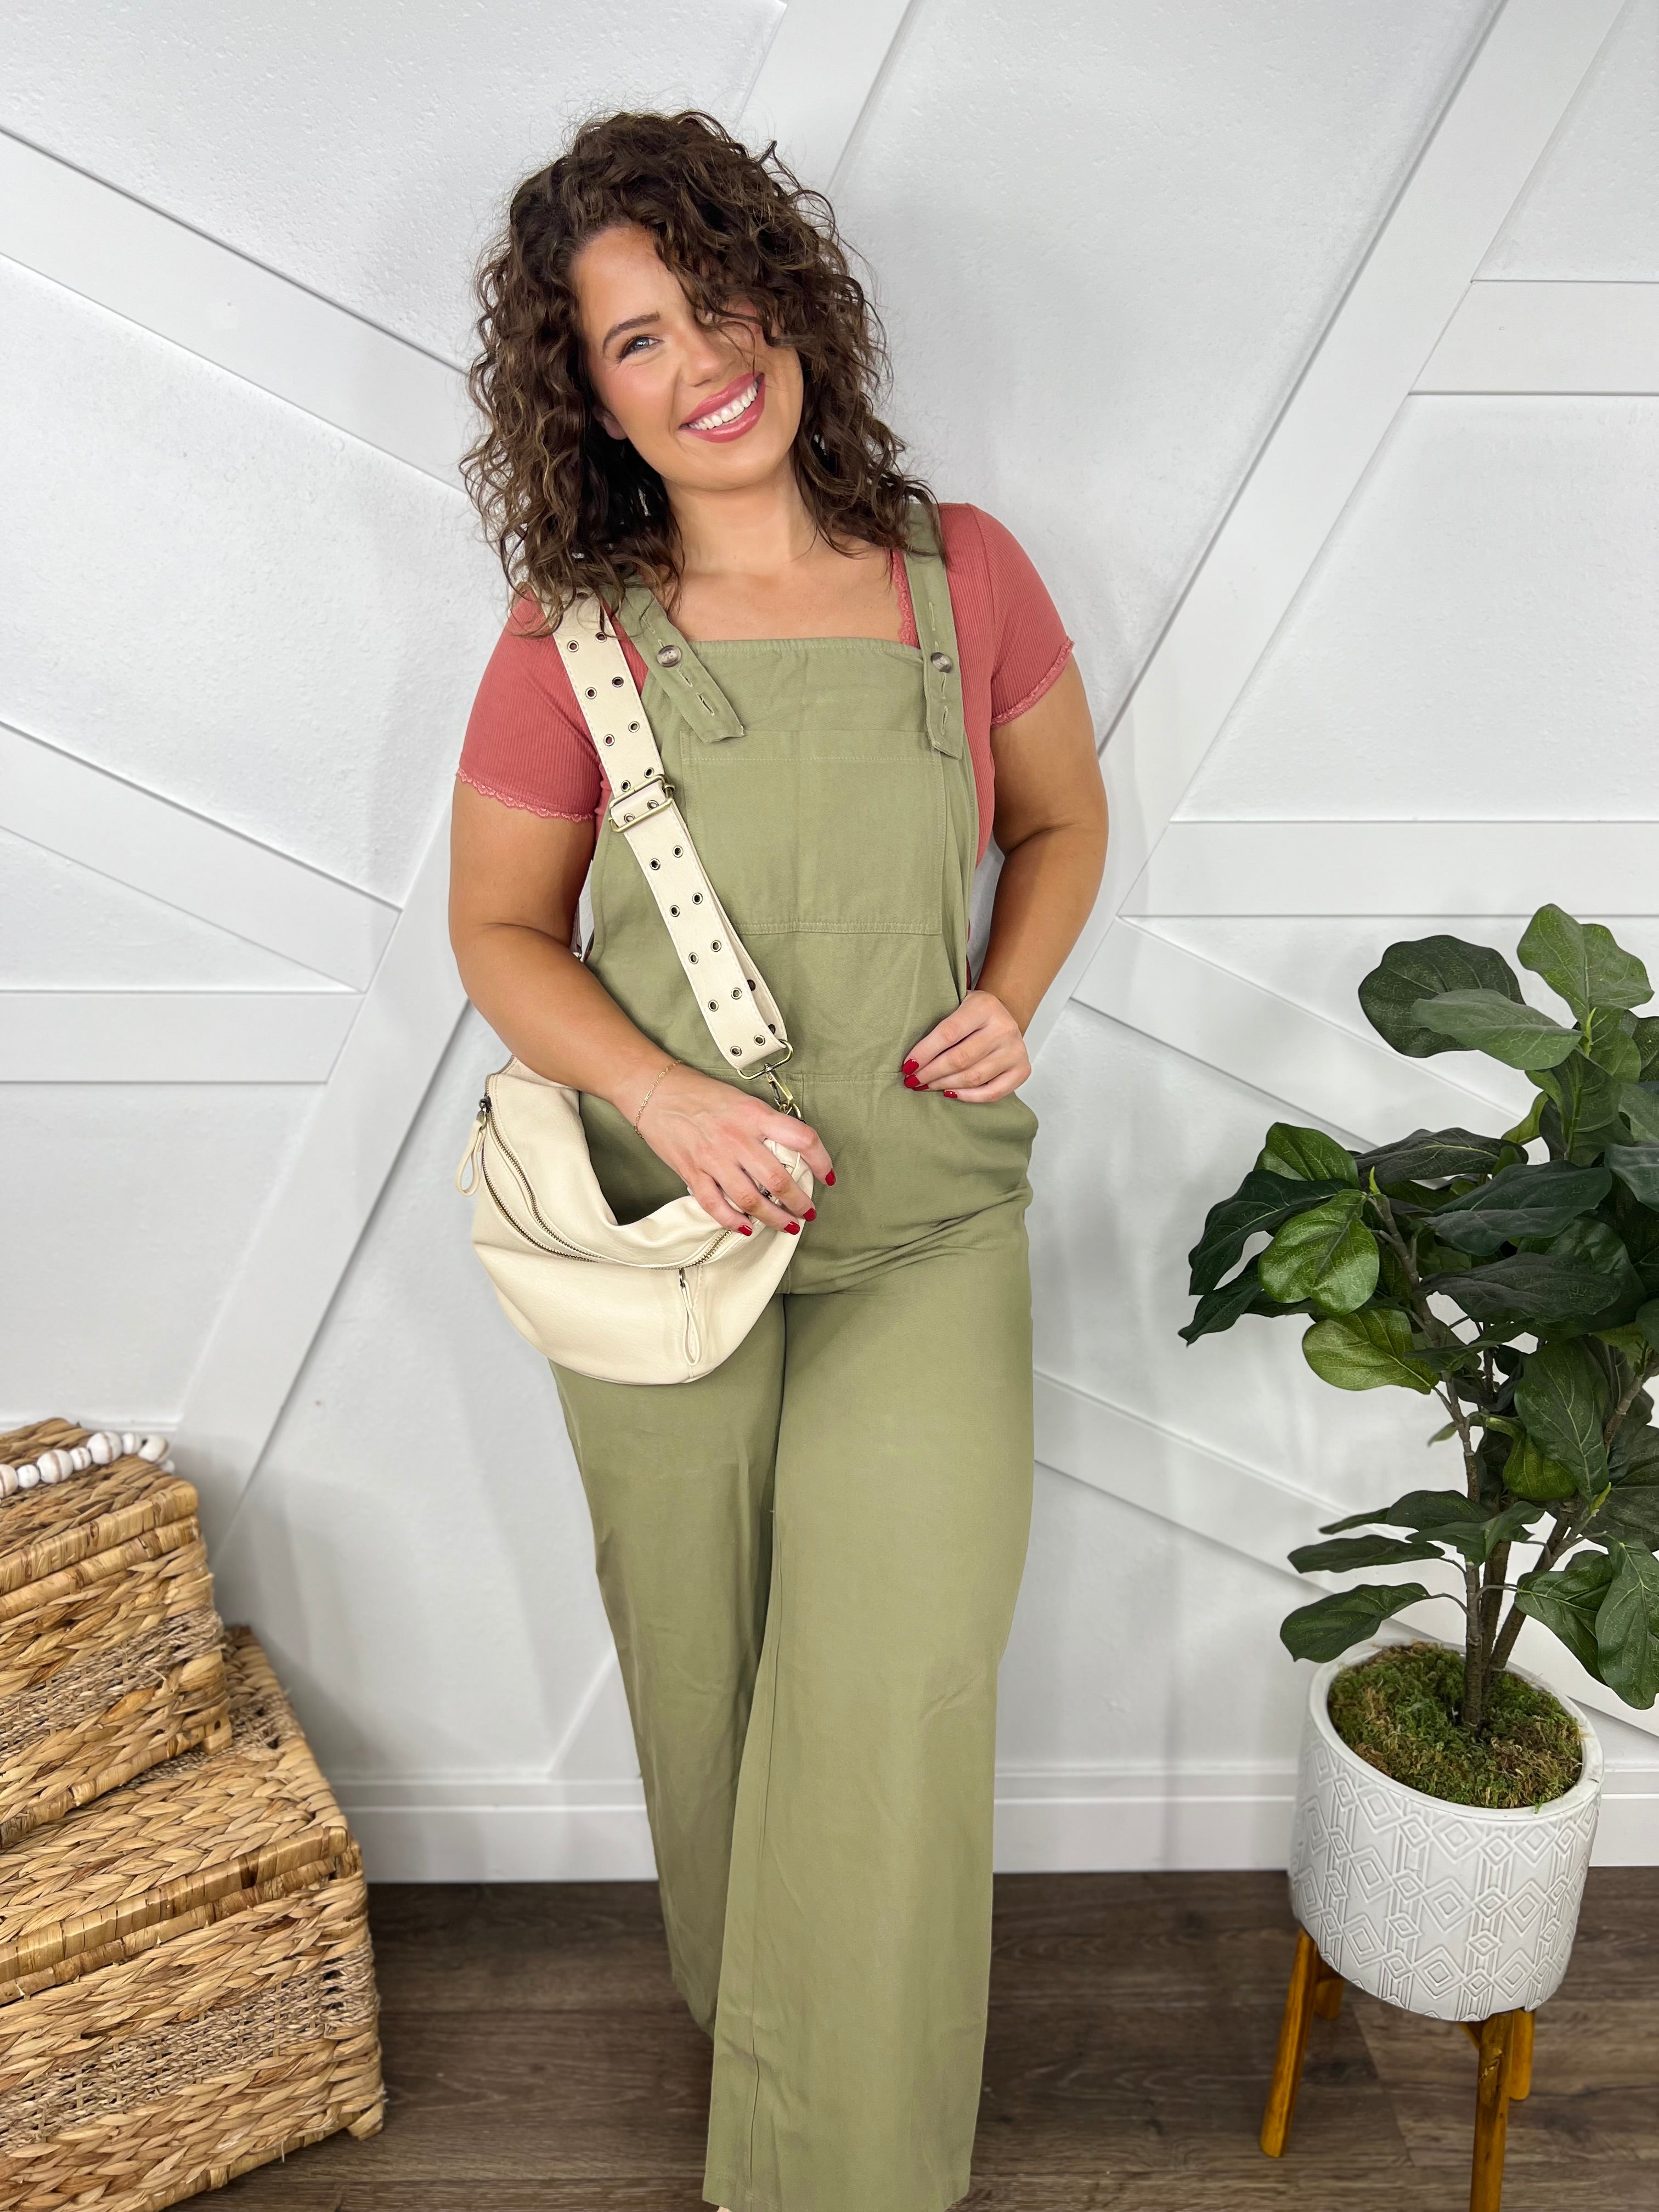 Heirloom Overalls-230 Dresses/Jumpsuits/Rompers-White Birch-Heathered Boho Boutique, Women's Fashion and Accessories in Palmetto, FL